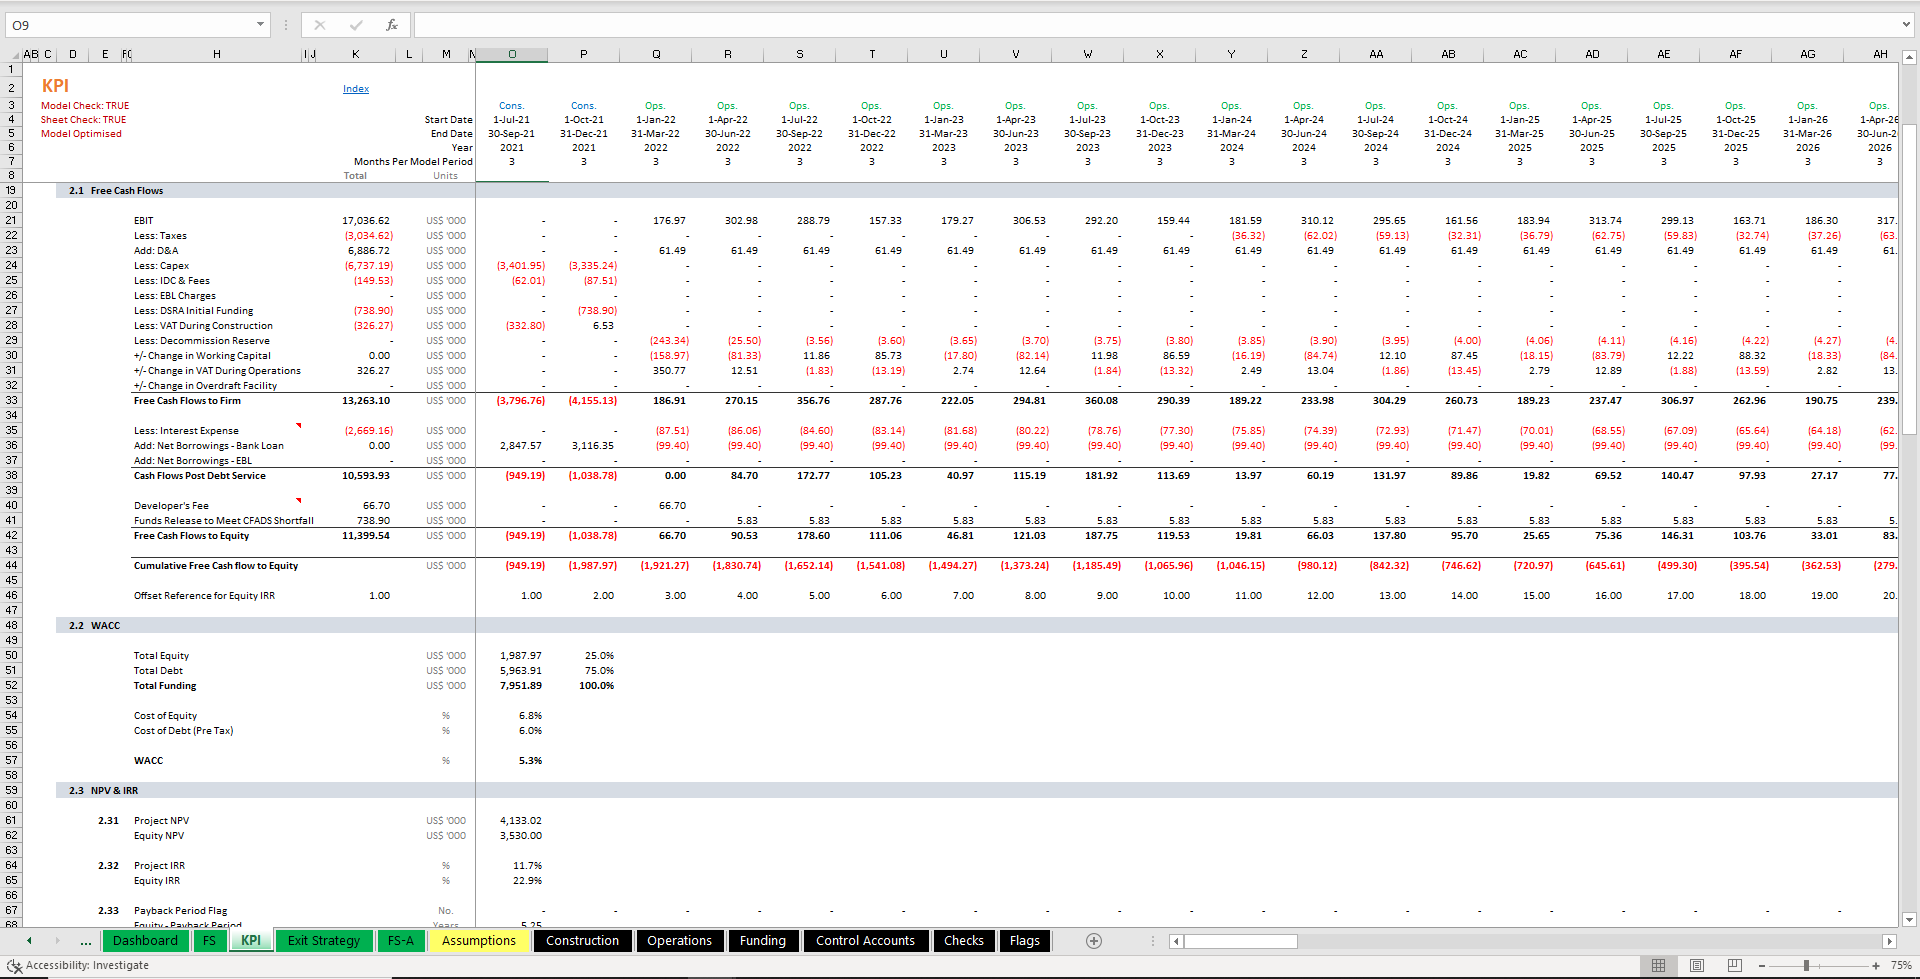 Project Feasibility - Solar Rooftop Excel Financial Model